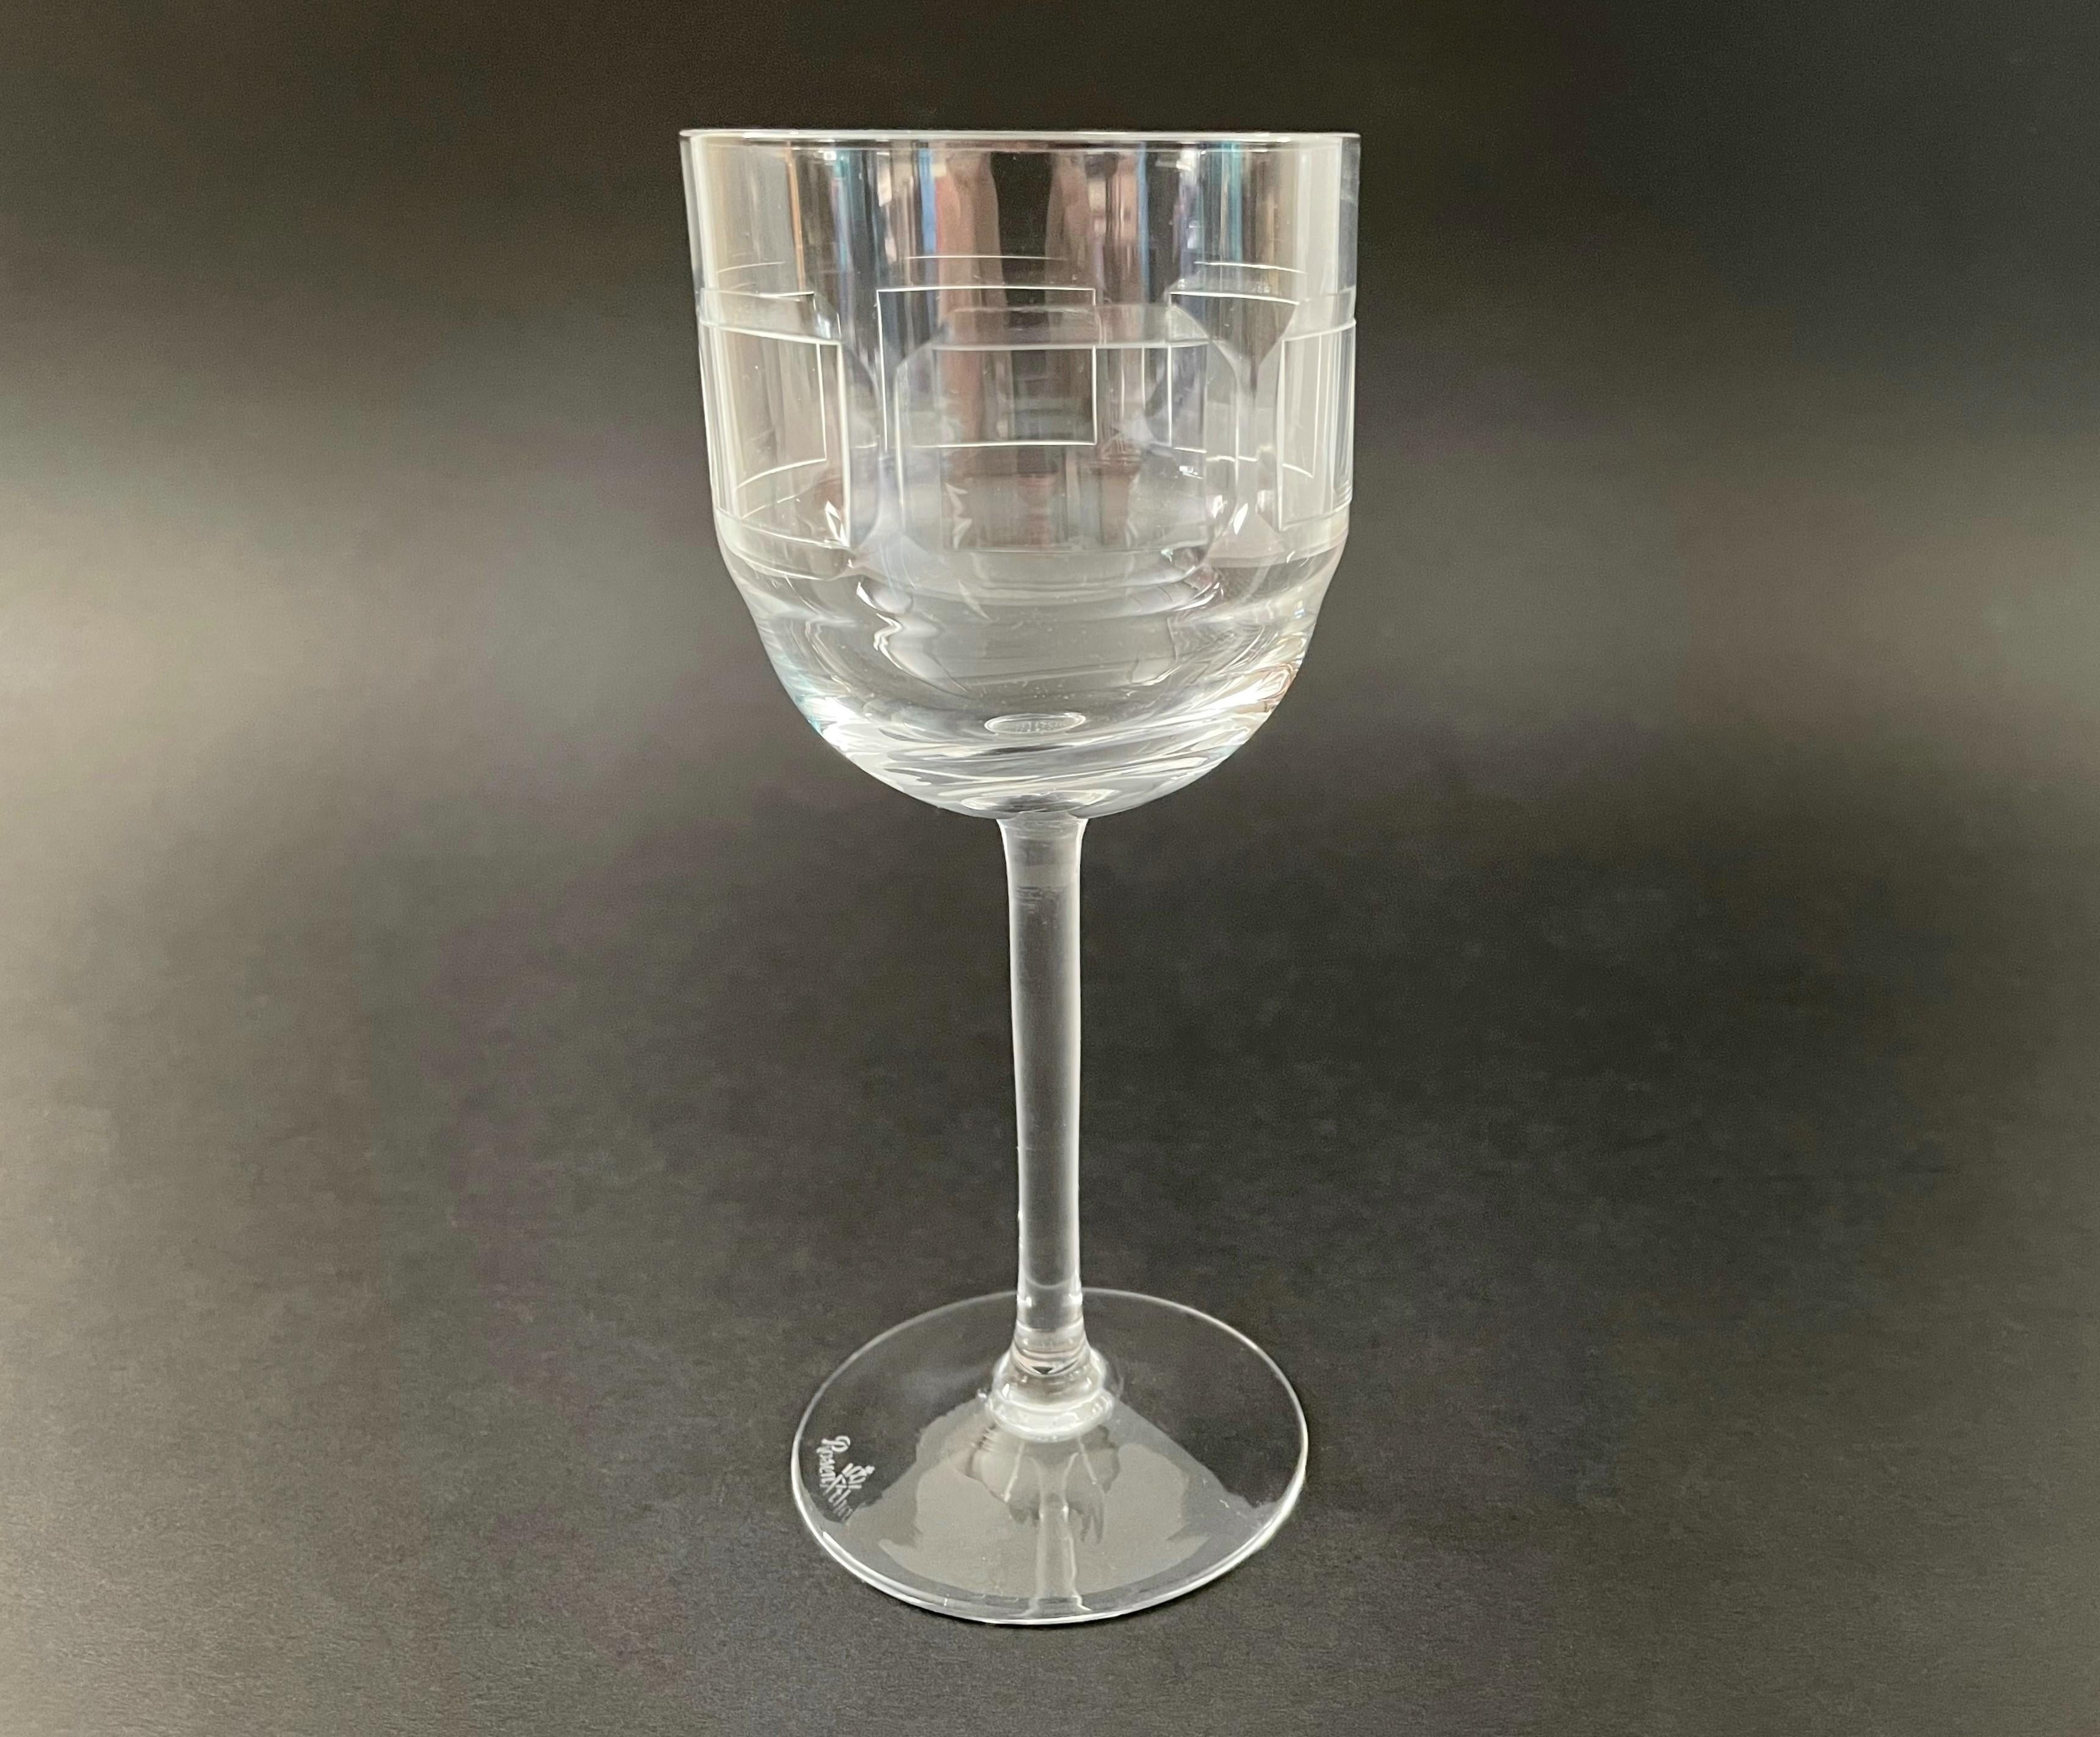 ROSENTHAL (Manufacturer) - SQUARES (Pattern) - Rare Mid Century wheel cut clear crystal wine glass - small size - featuring a band of six engraved squares to the outside of the glass - signed on the base - Germany - circa 1960's.

Excellent / mint